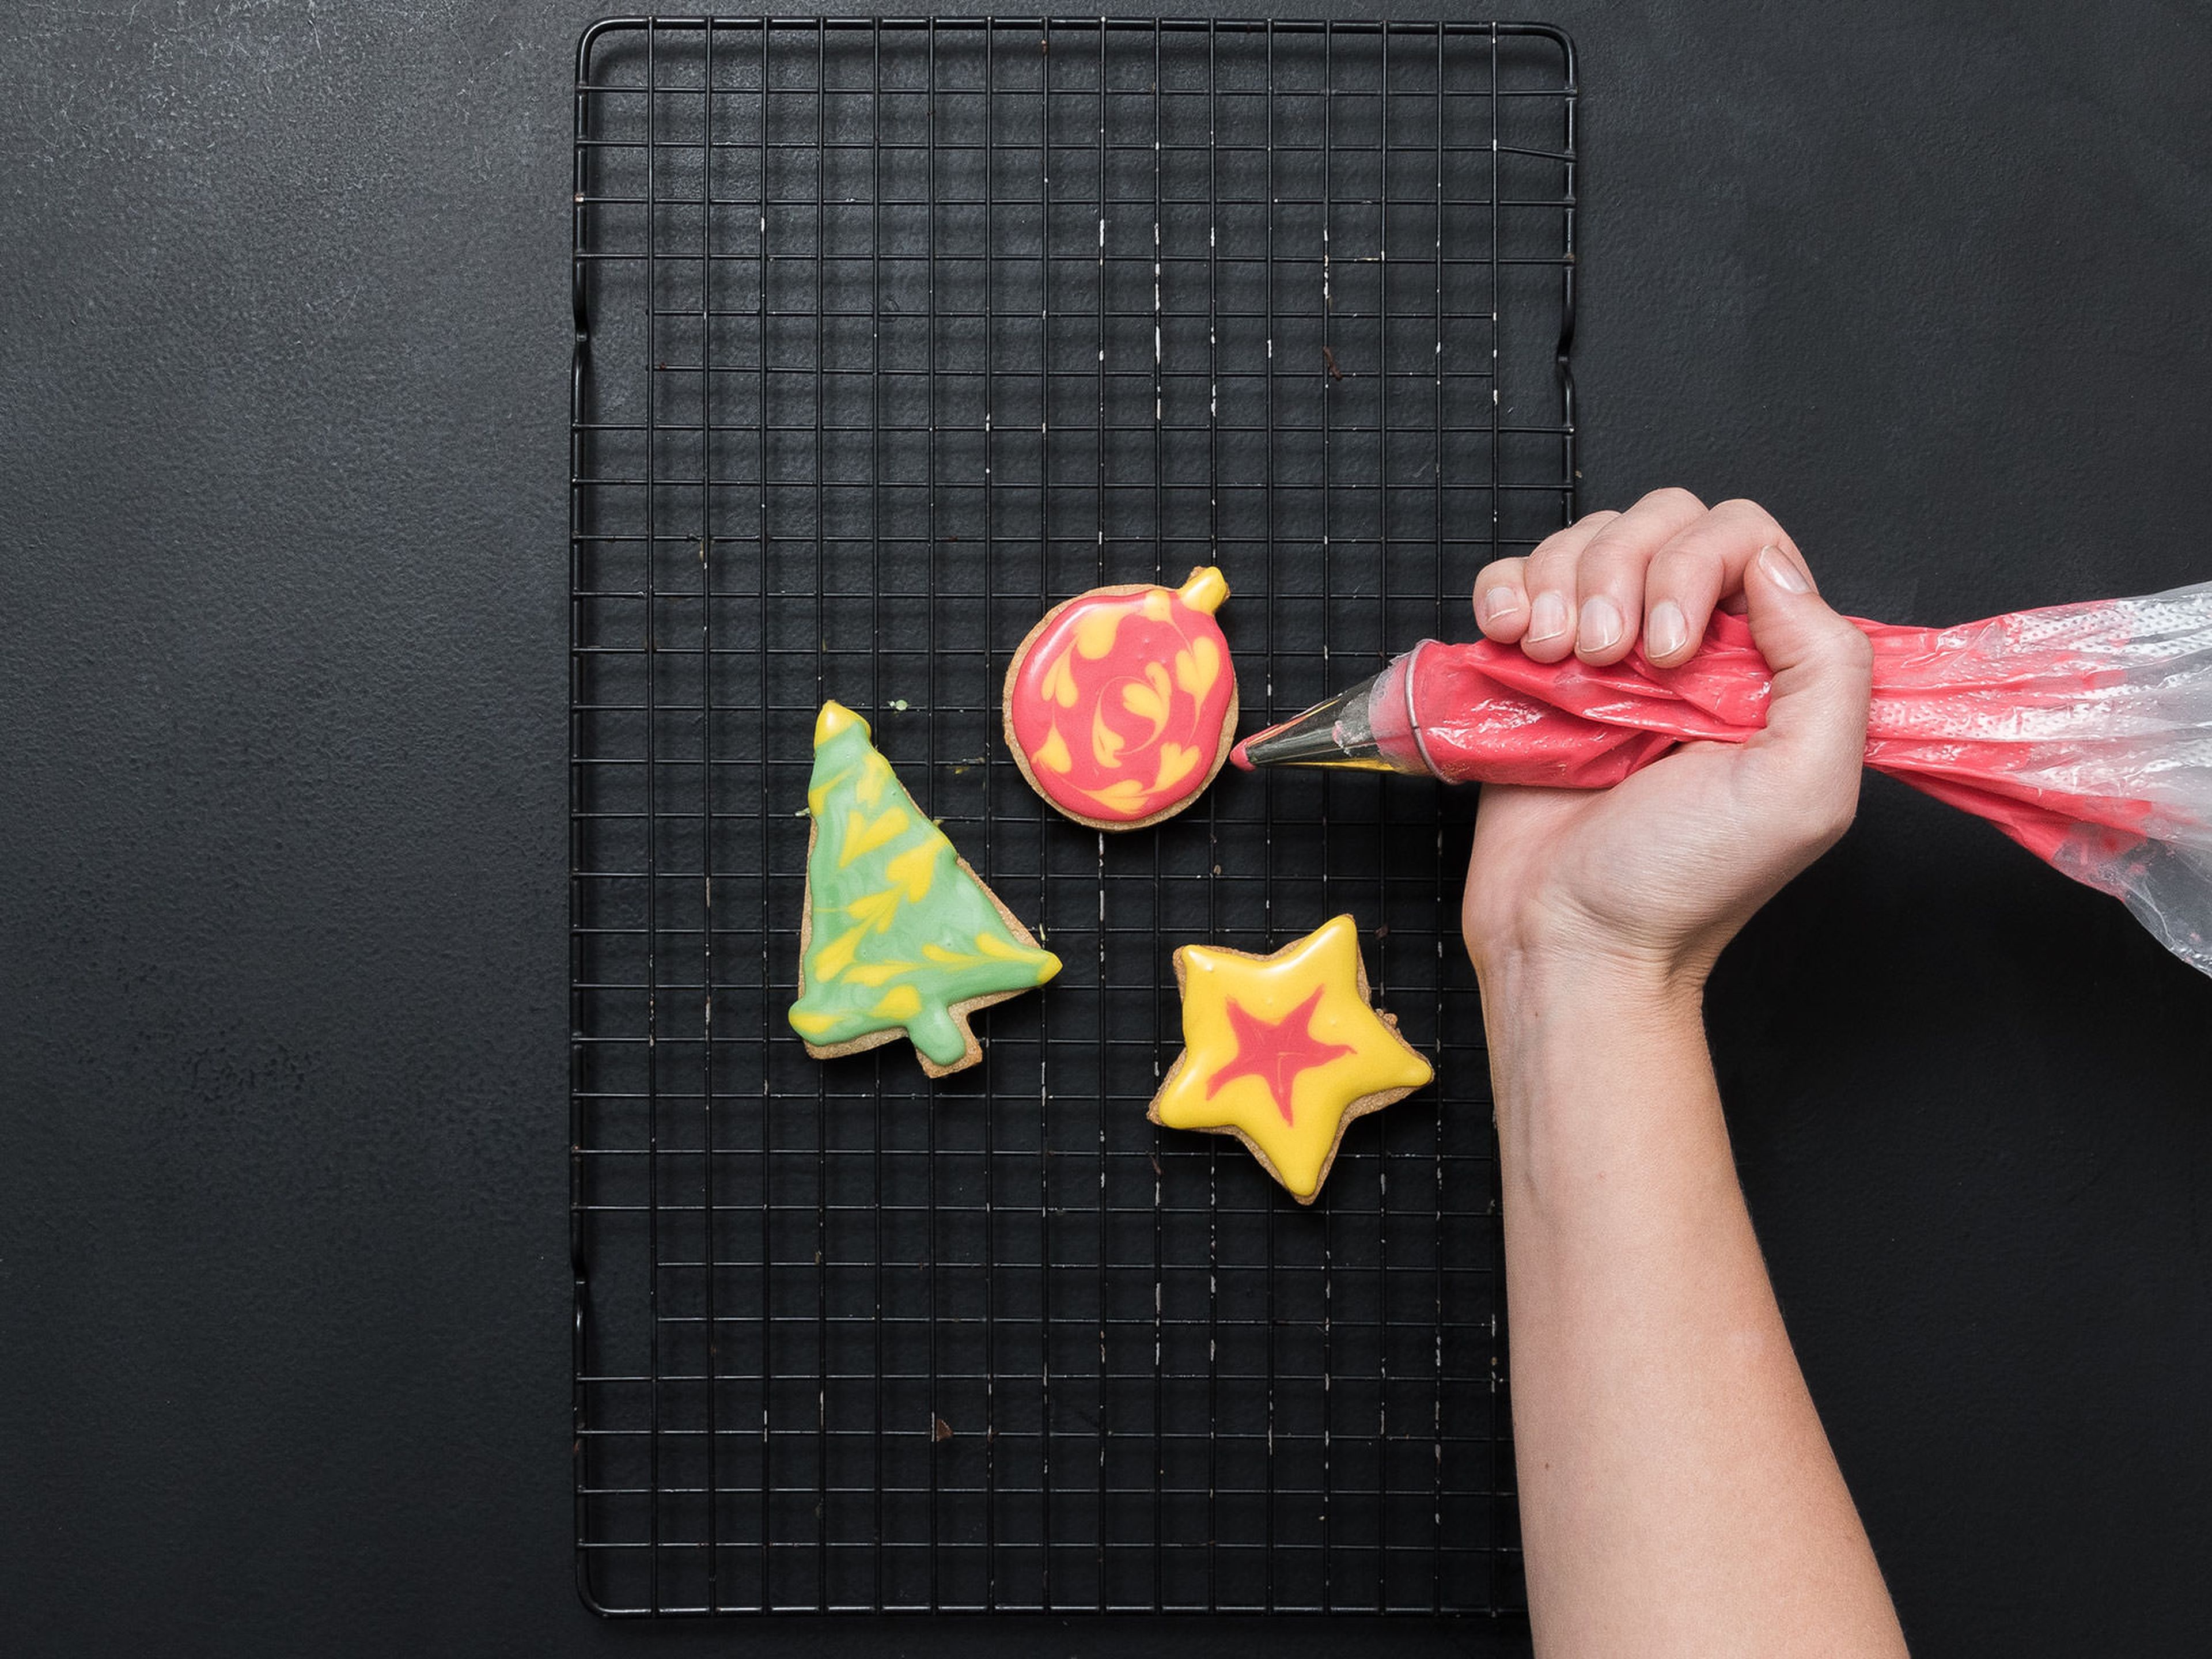 Decorate the cookies with the colorful icing. For a pattern on the icing, apply dots or lines on top of the base layer of icing. Before the icing dries, use a toothpick to pull the top color through the bottom layer in a pattern you like. Allow to dry over night before packaging. Enjoy!